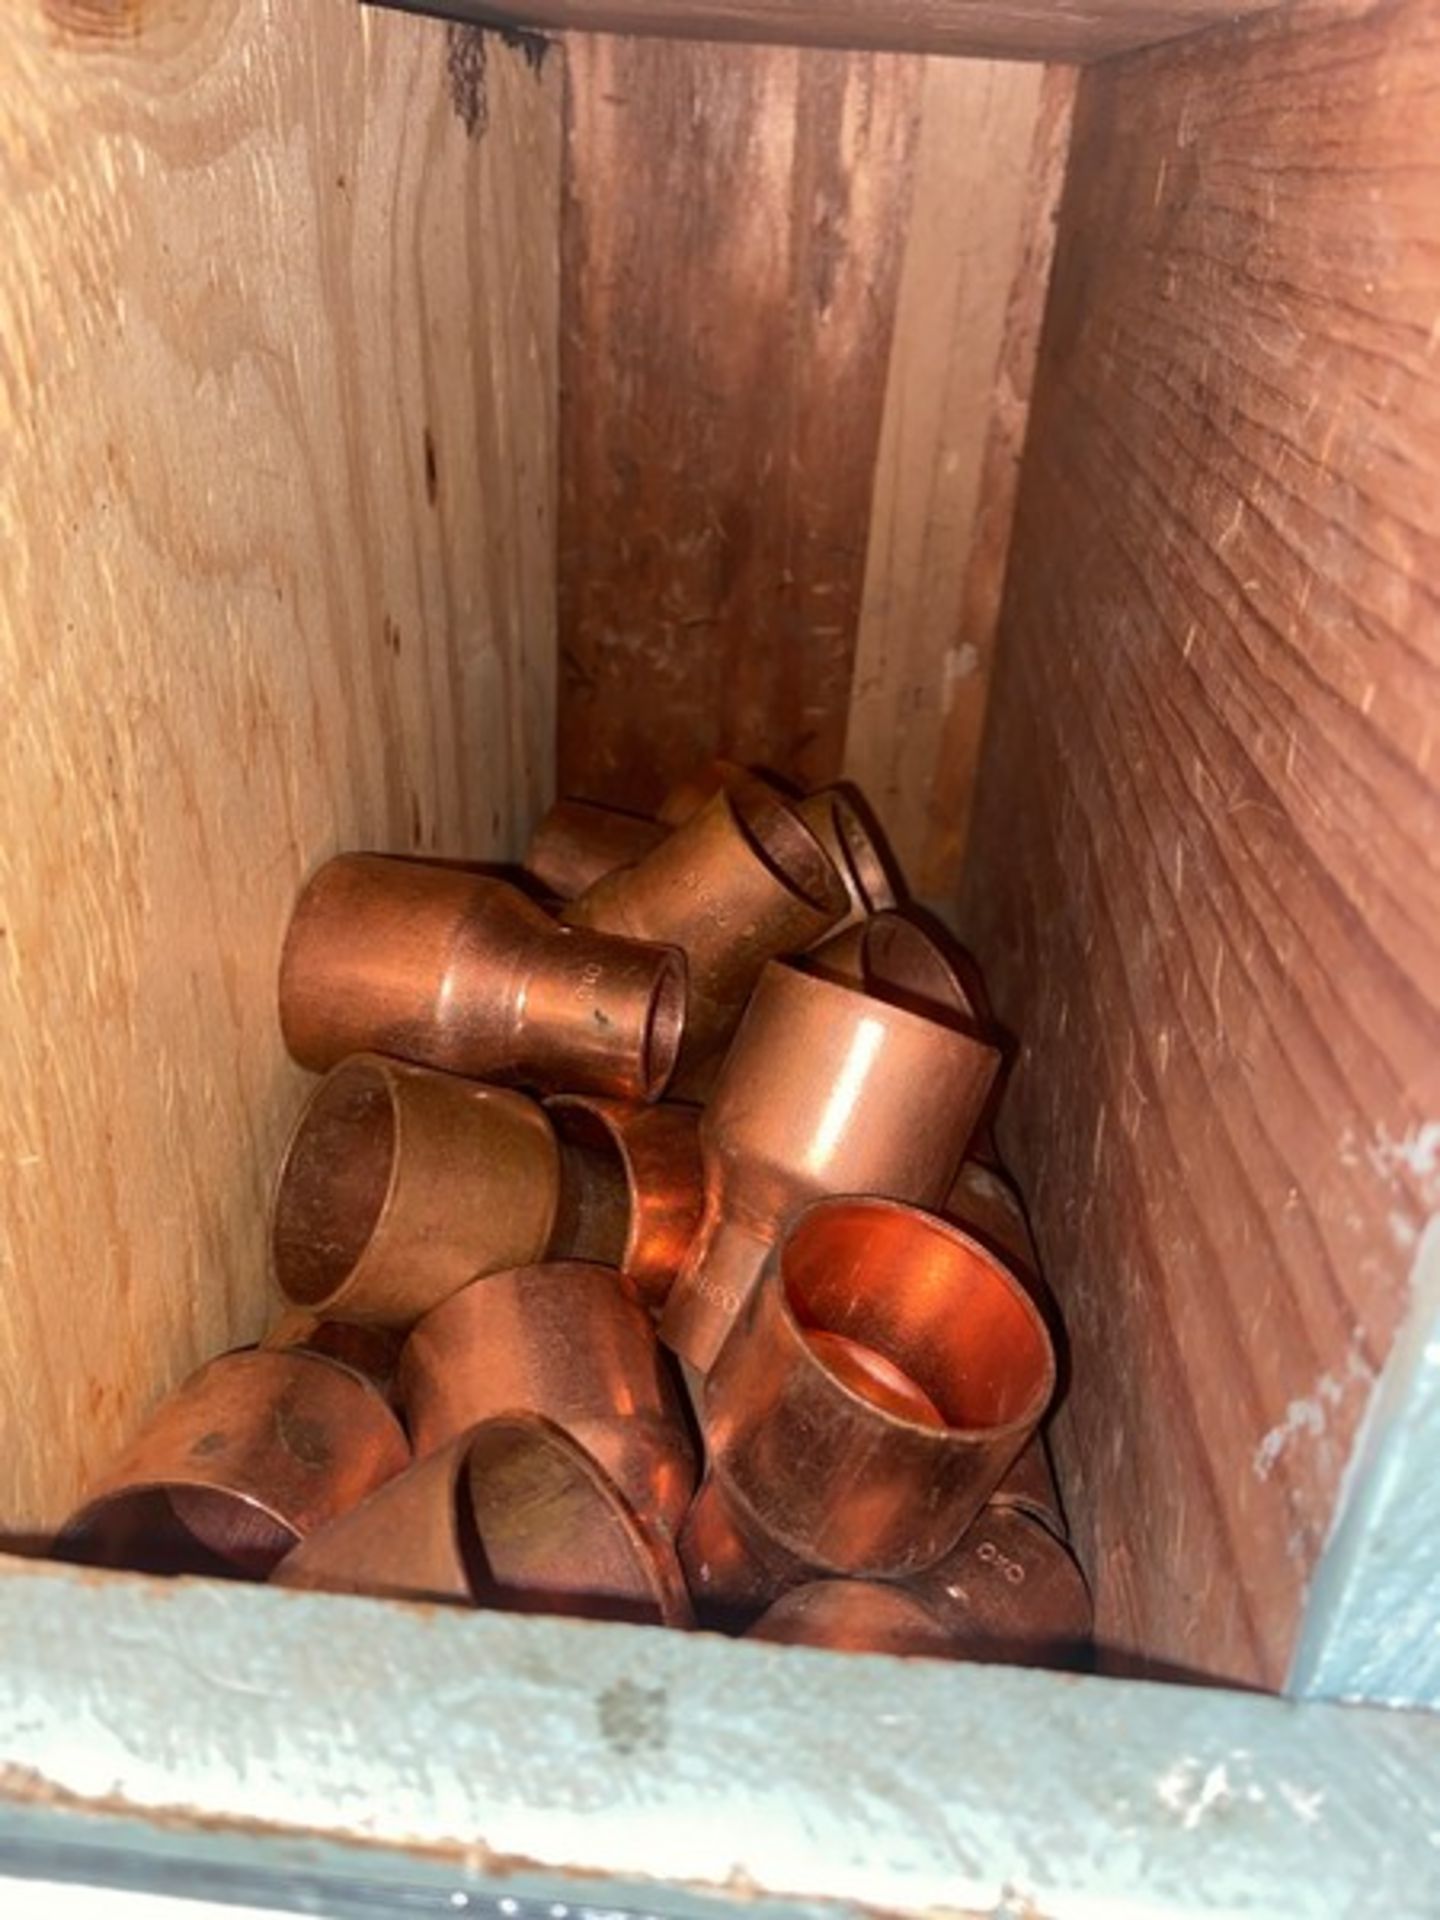 (19) 1 1/4” x 3/4” Reducing Coupling (Bin:C42) (LOCATED IN MONROEVILLE, PA)